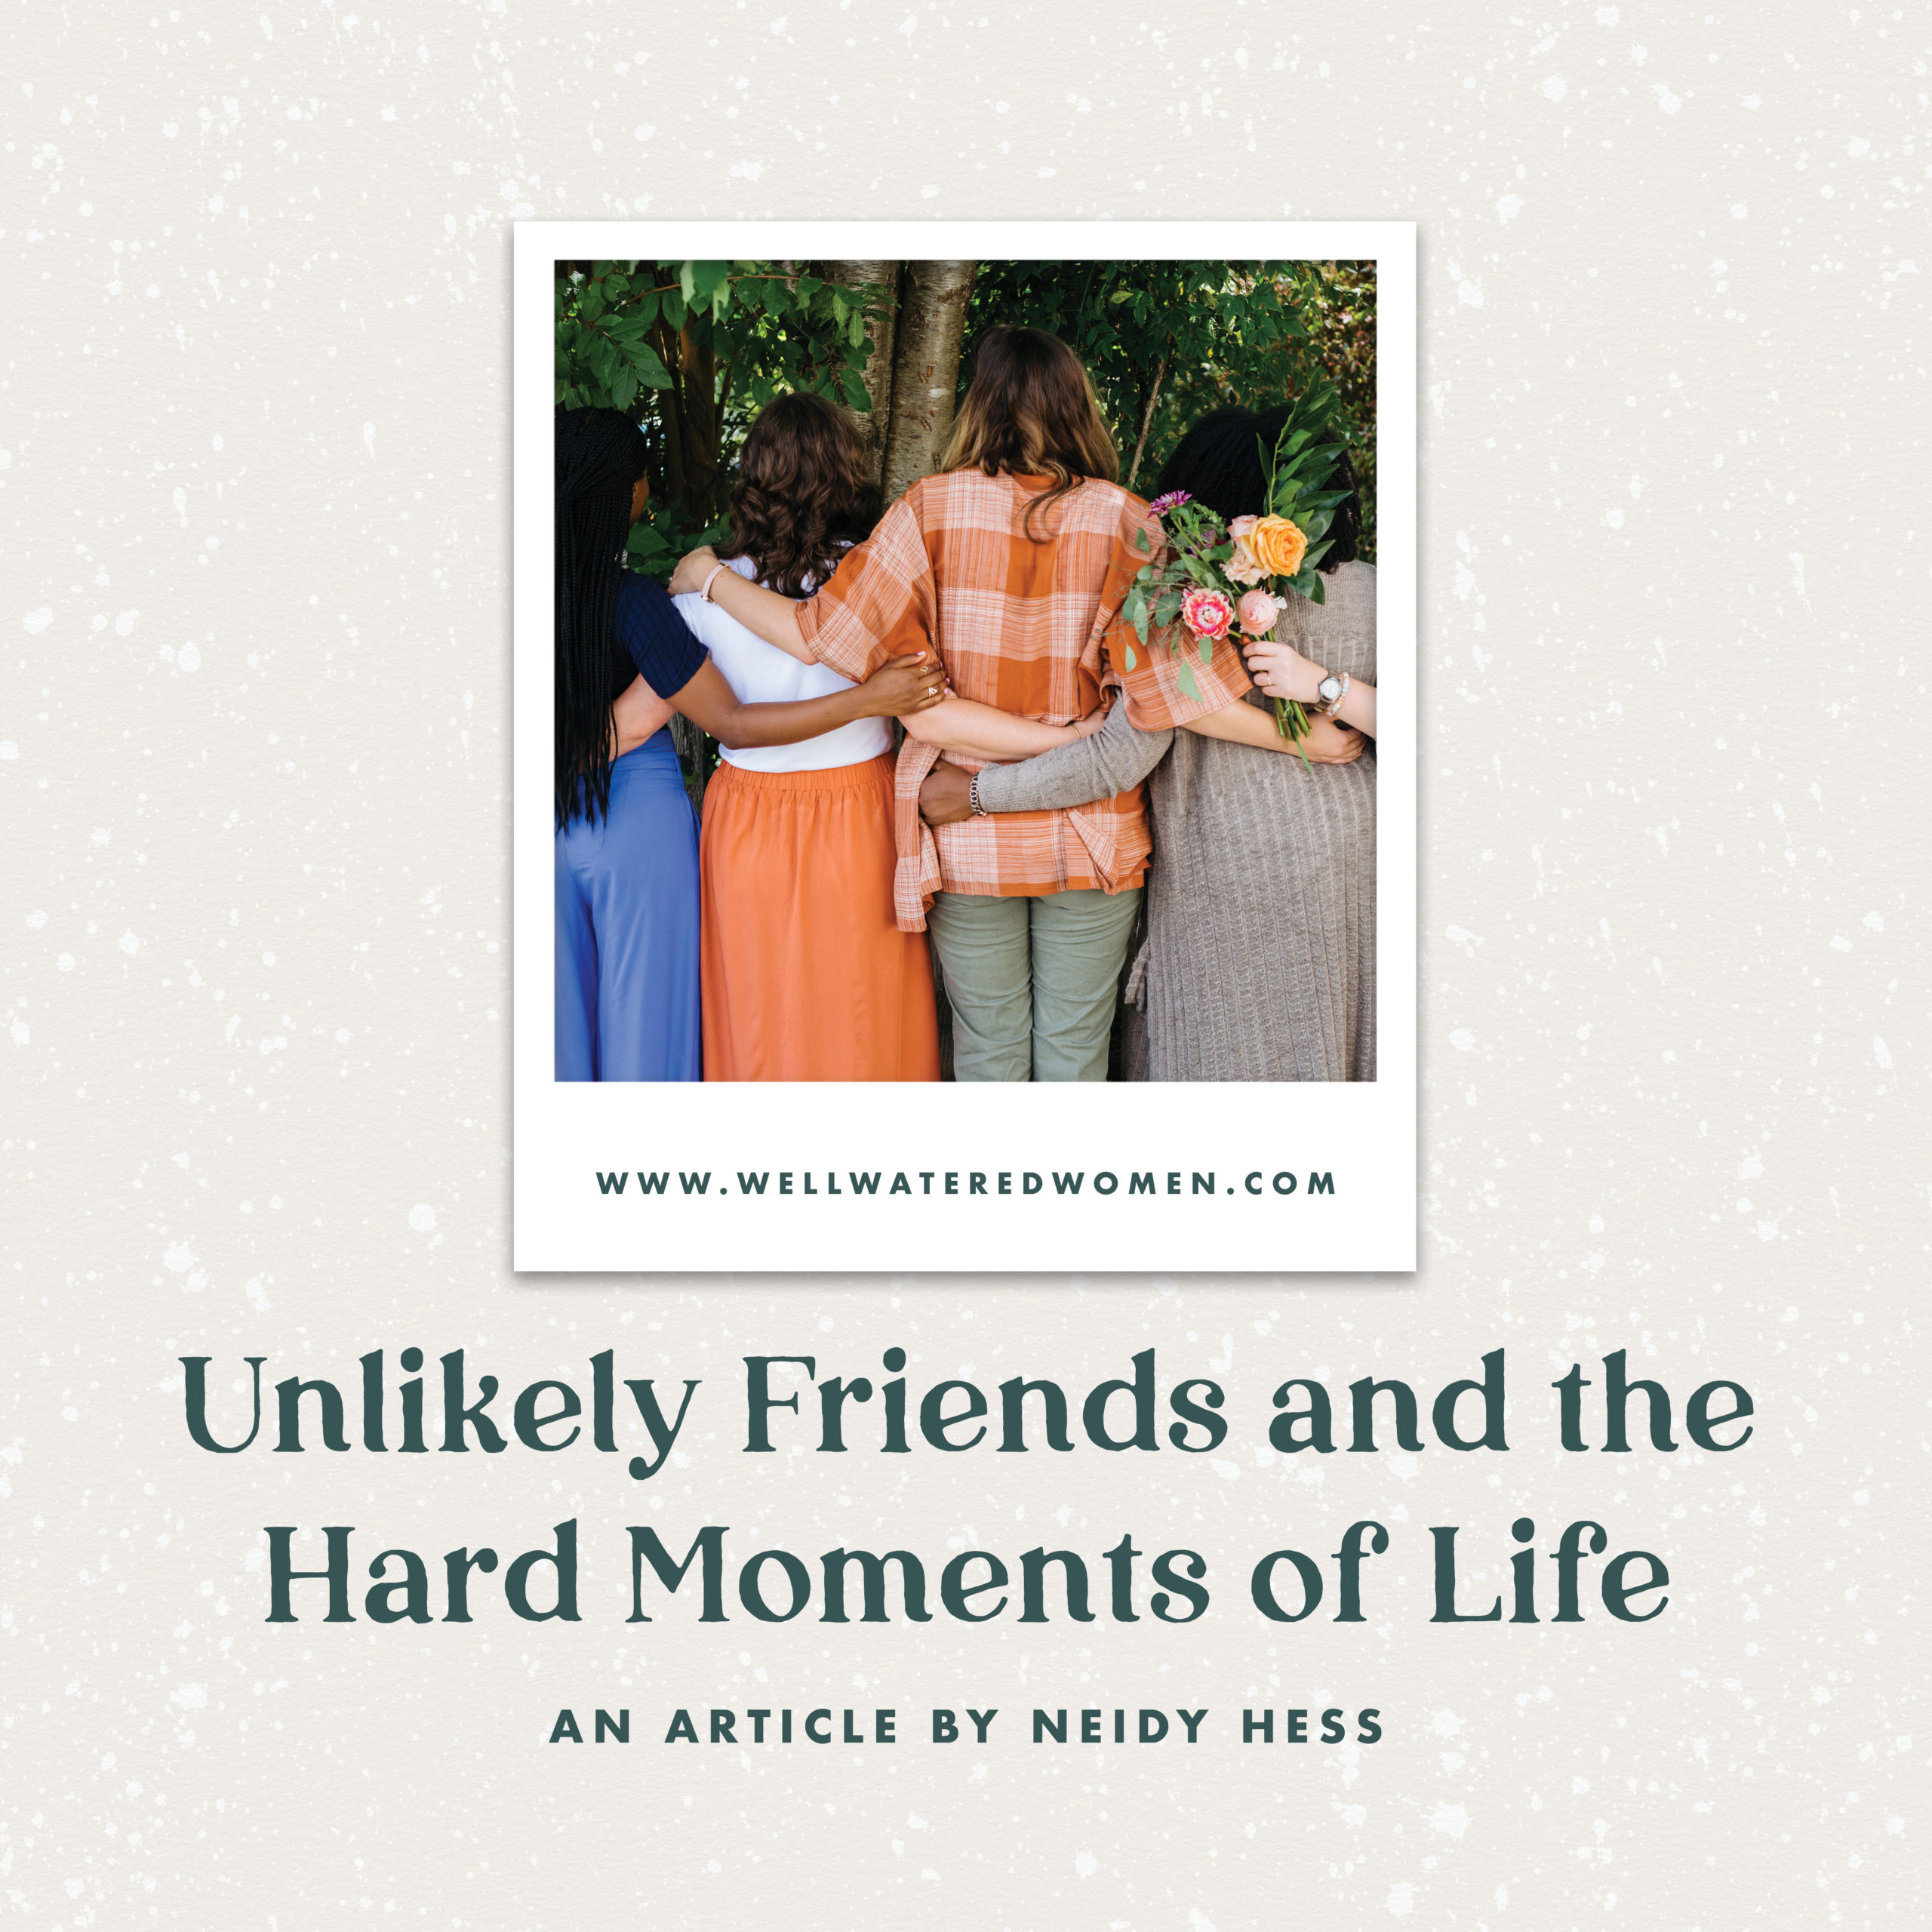 Unlikely Friends and the Hard Moments of Life - An Article by Neidy Hess